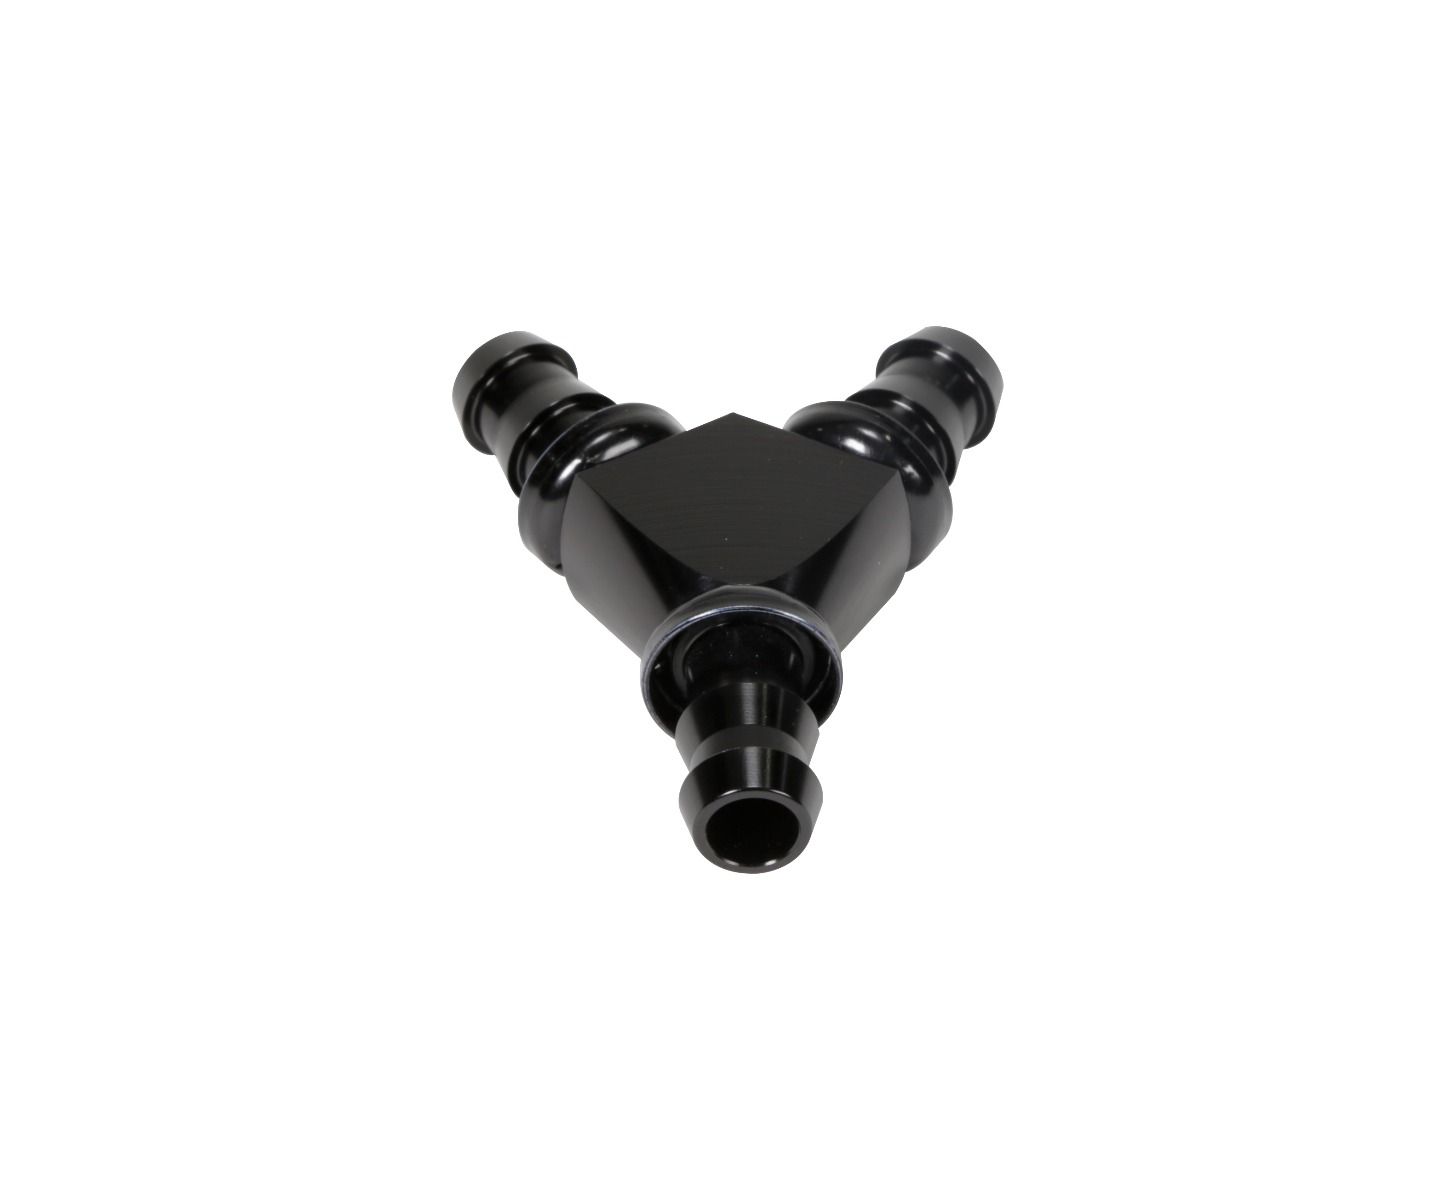 Fleece Performance 1/2 Inch Black Anodized Aluminum Y Barbed Fitting (For -8 Pushlock Hose) pn fpe-fit-y08-blk